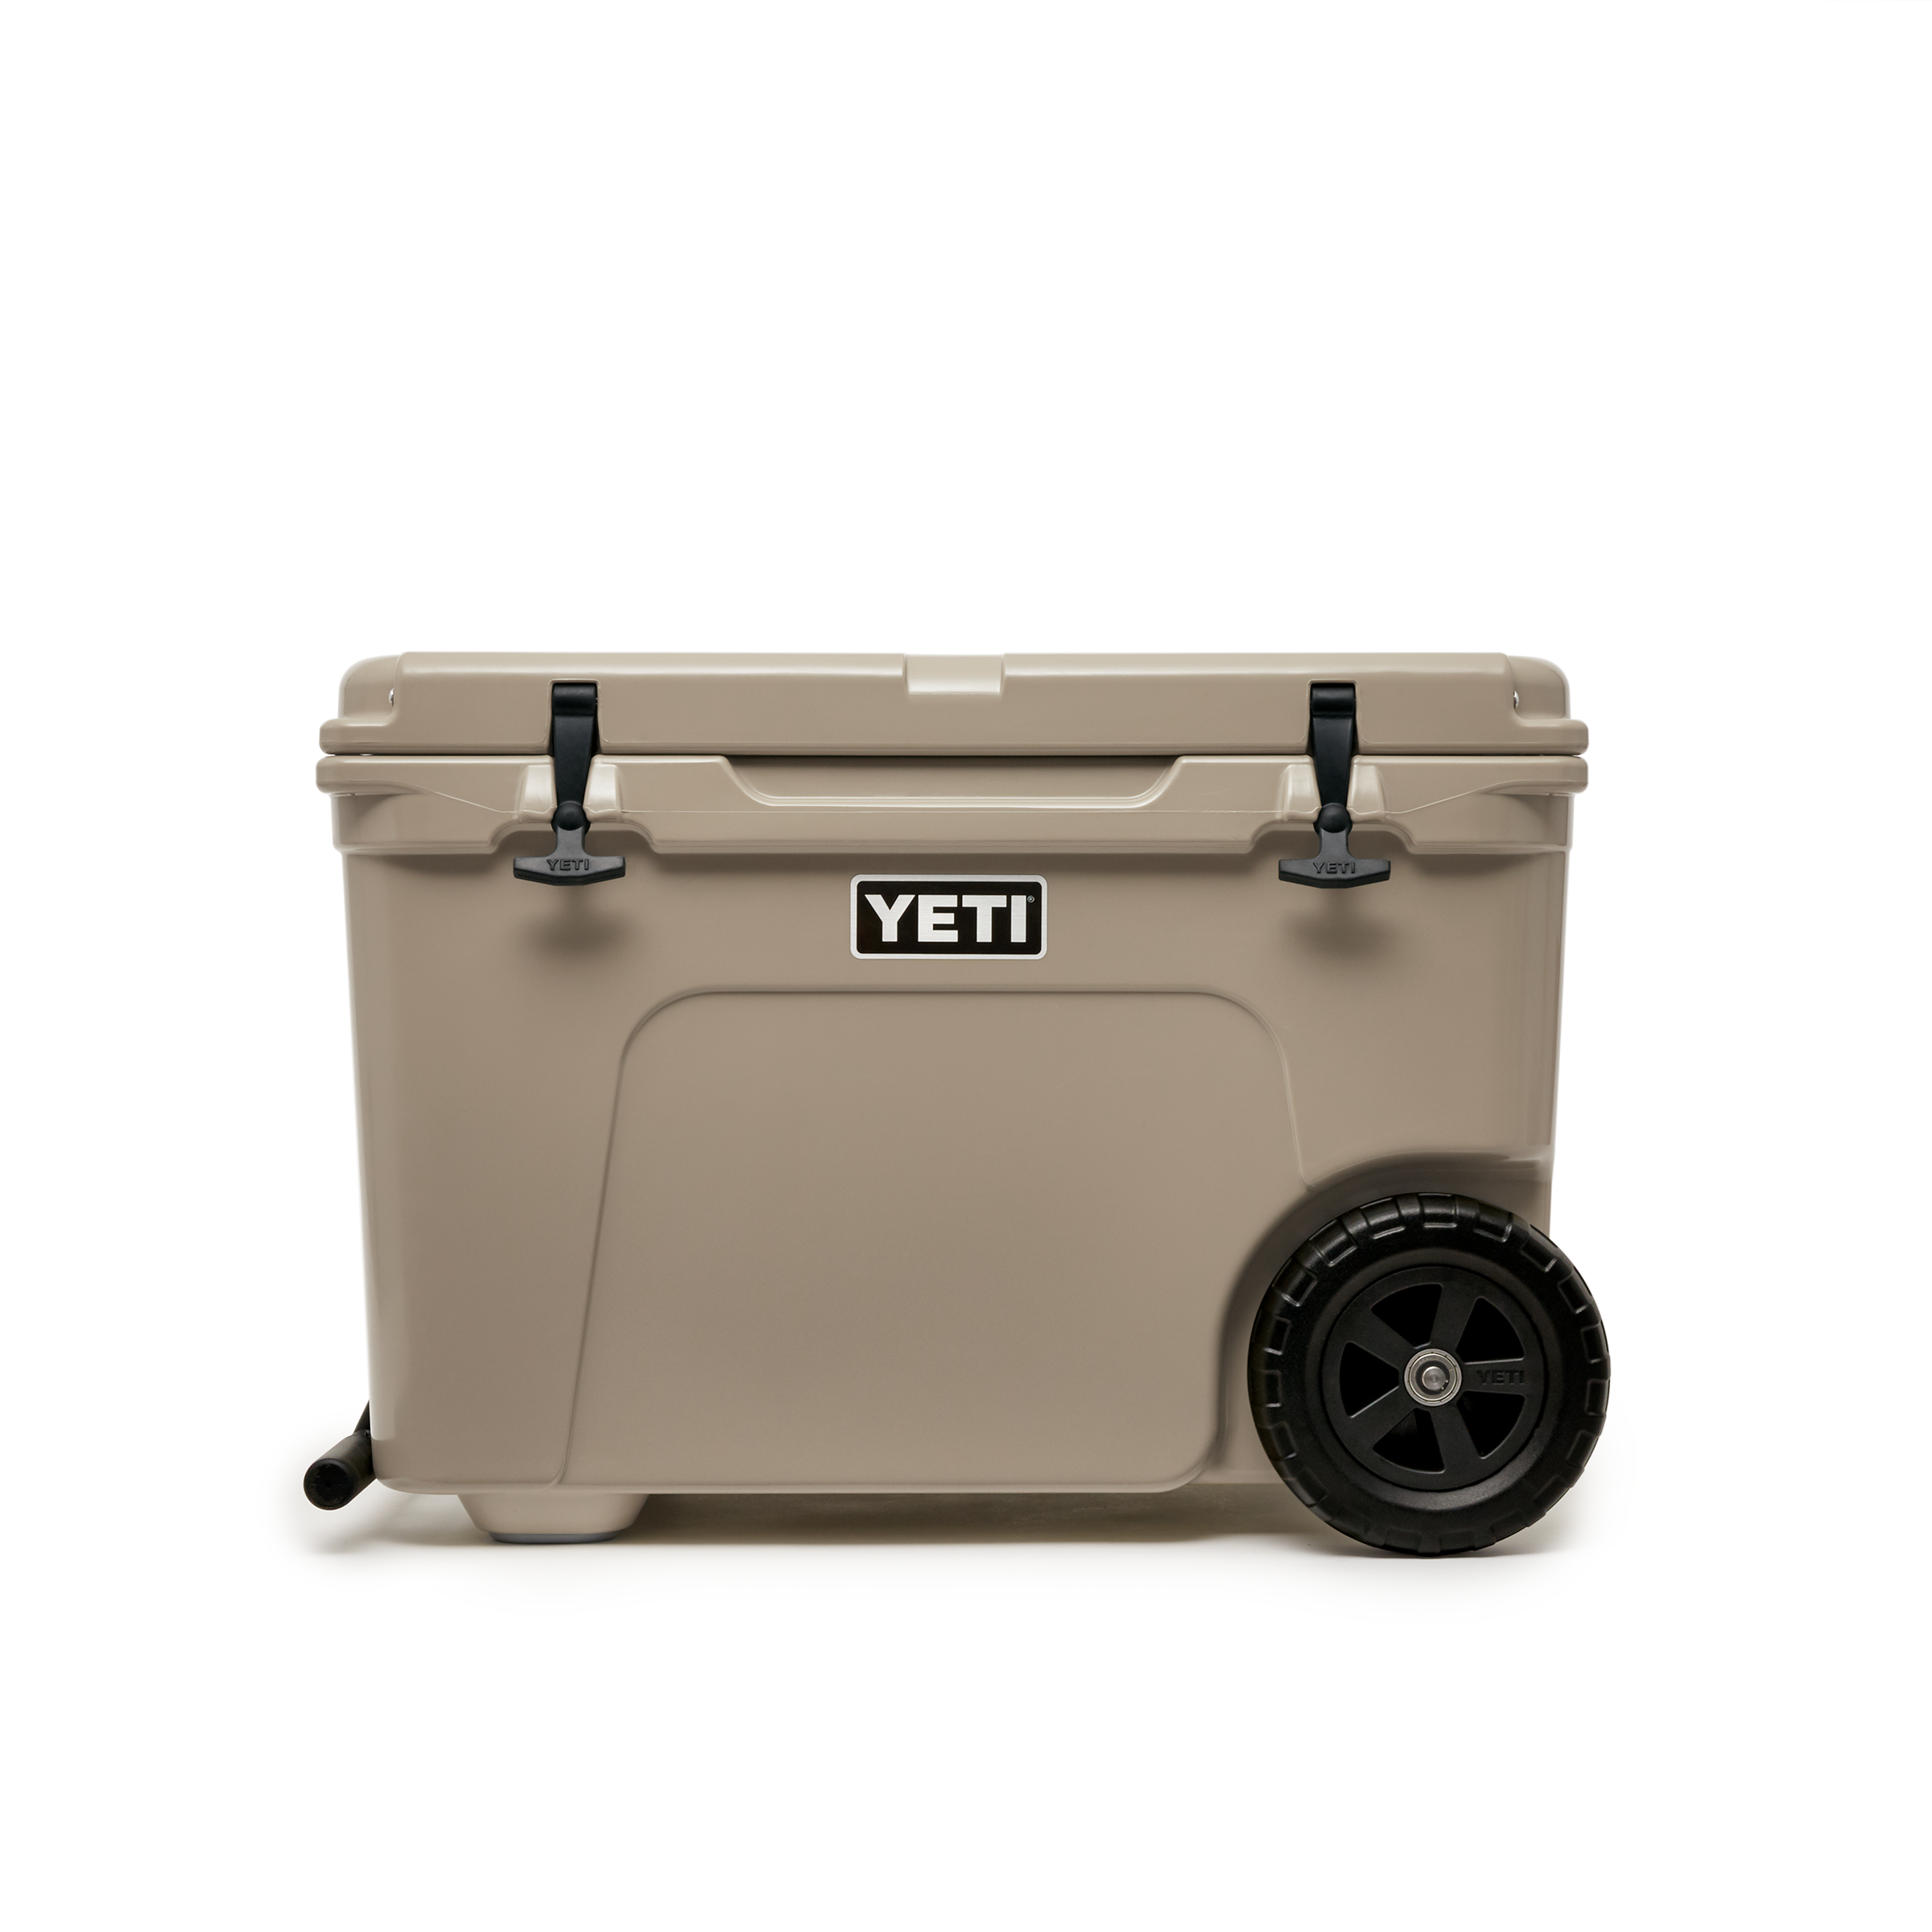 yeti-tundrahaul-side-view.png